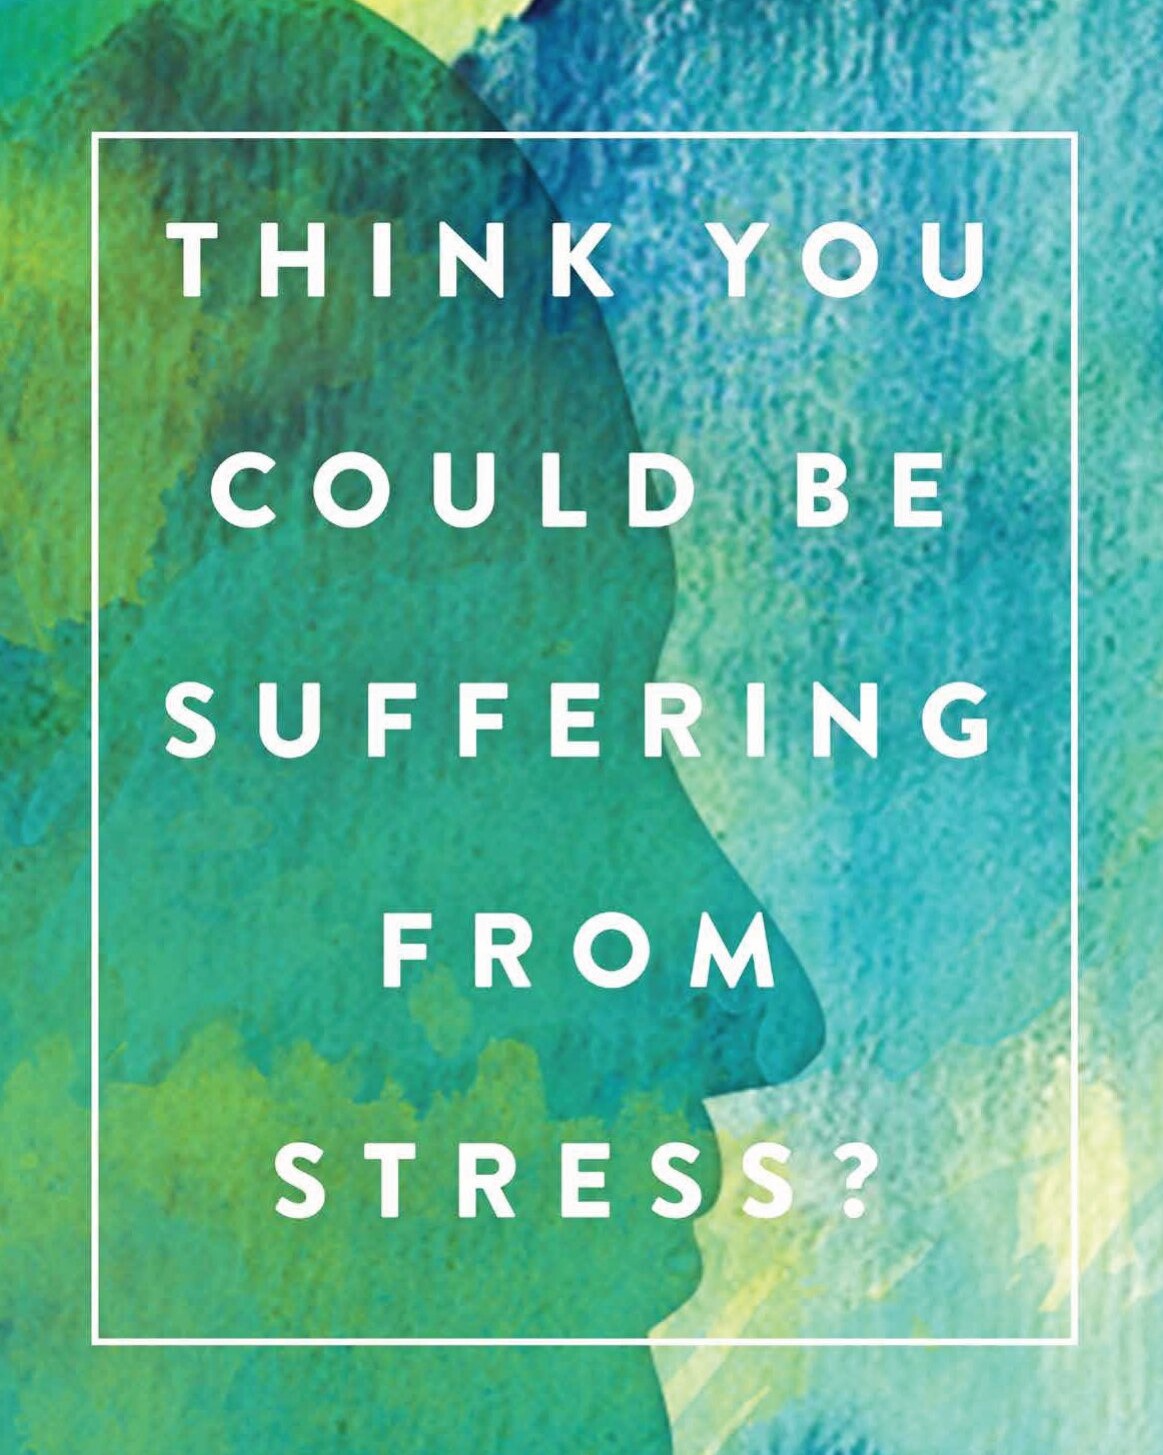 Think you could be suffering from stress?